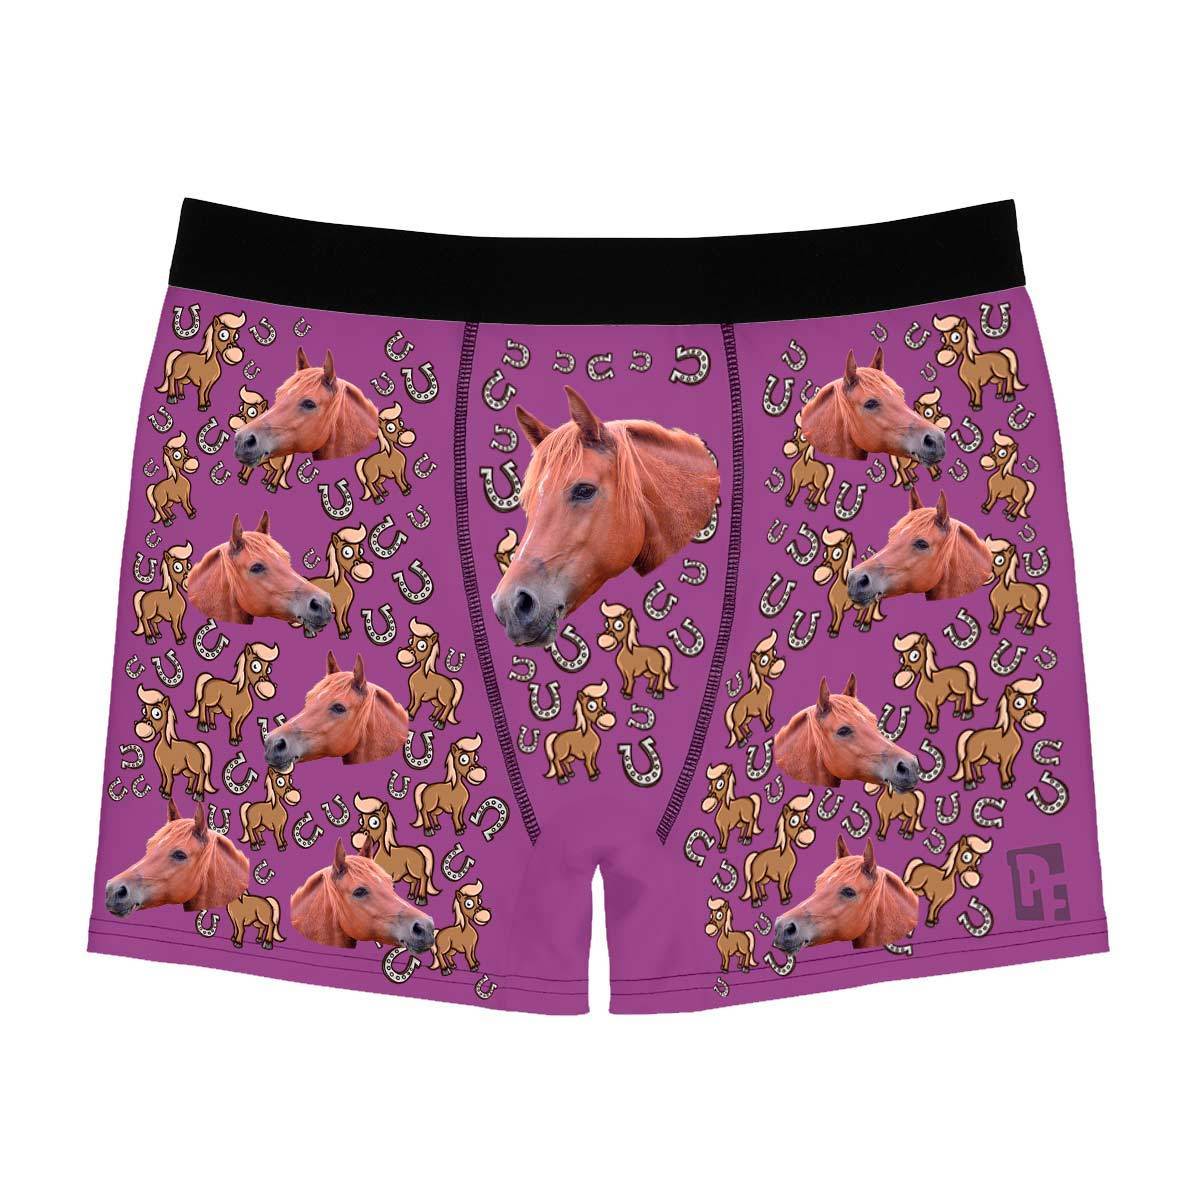 Purple Horse men's boxer briefs personalized with photo printed on them